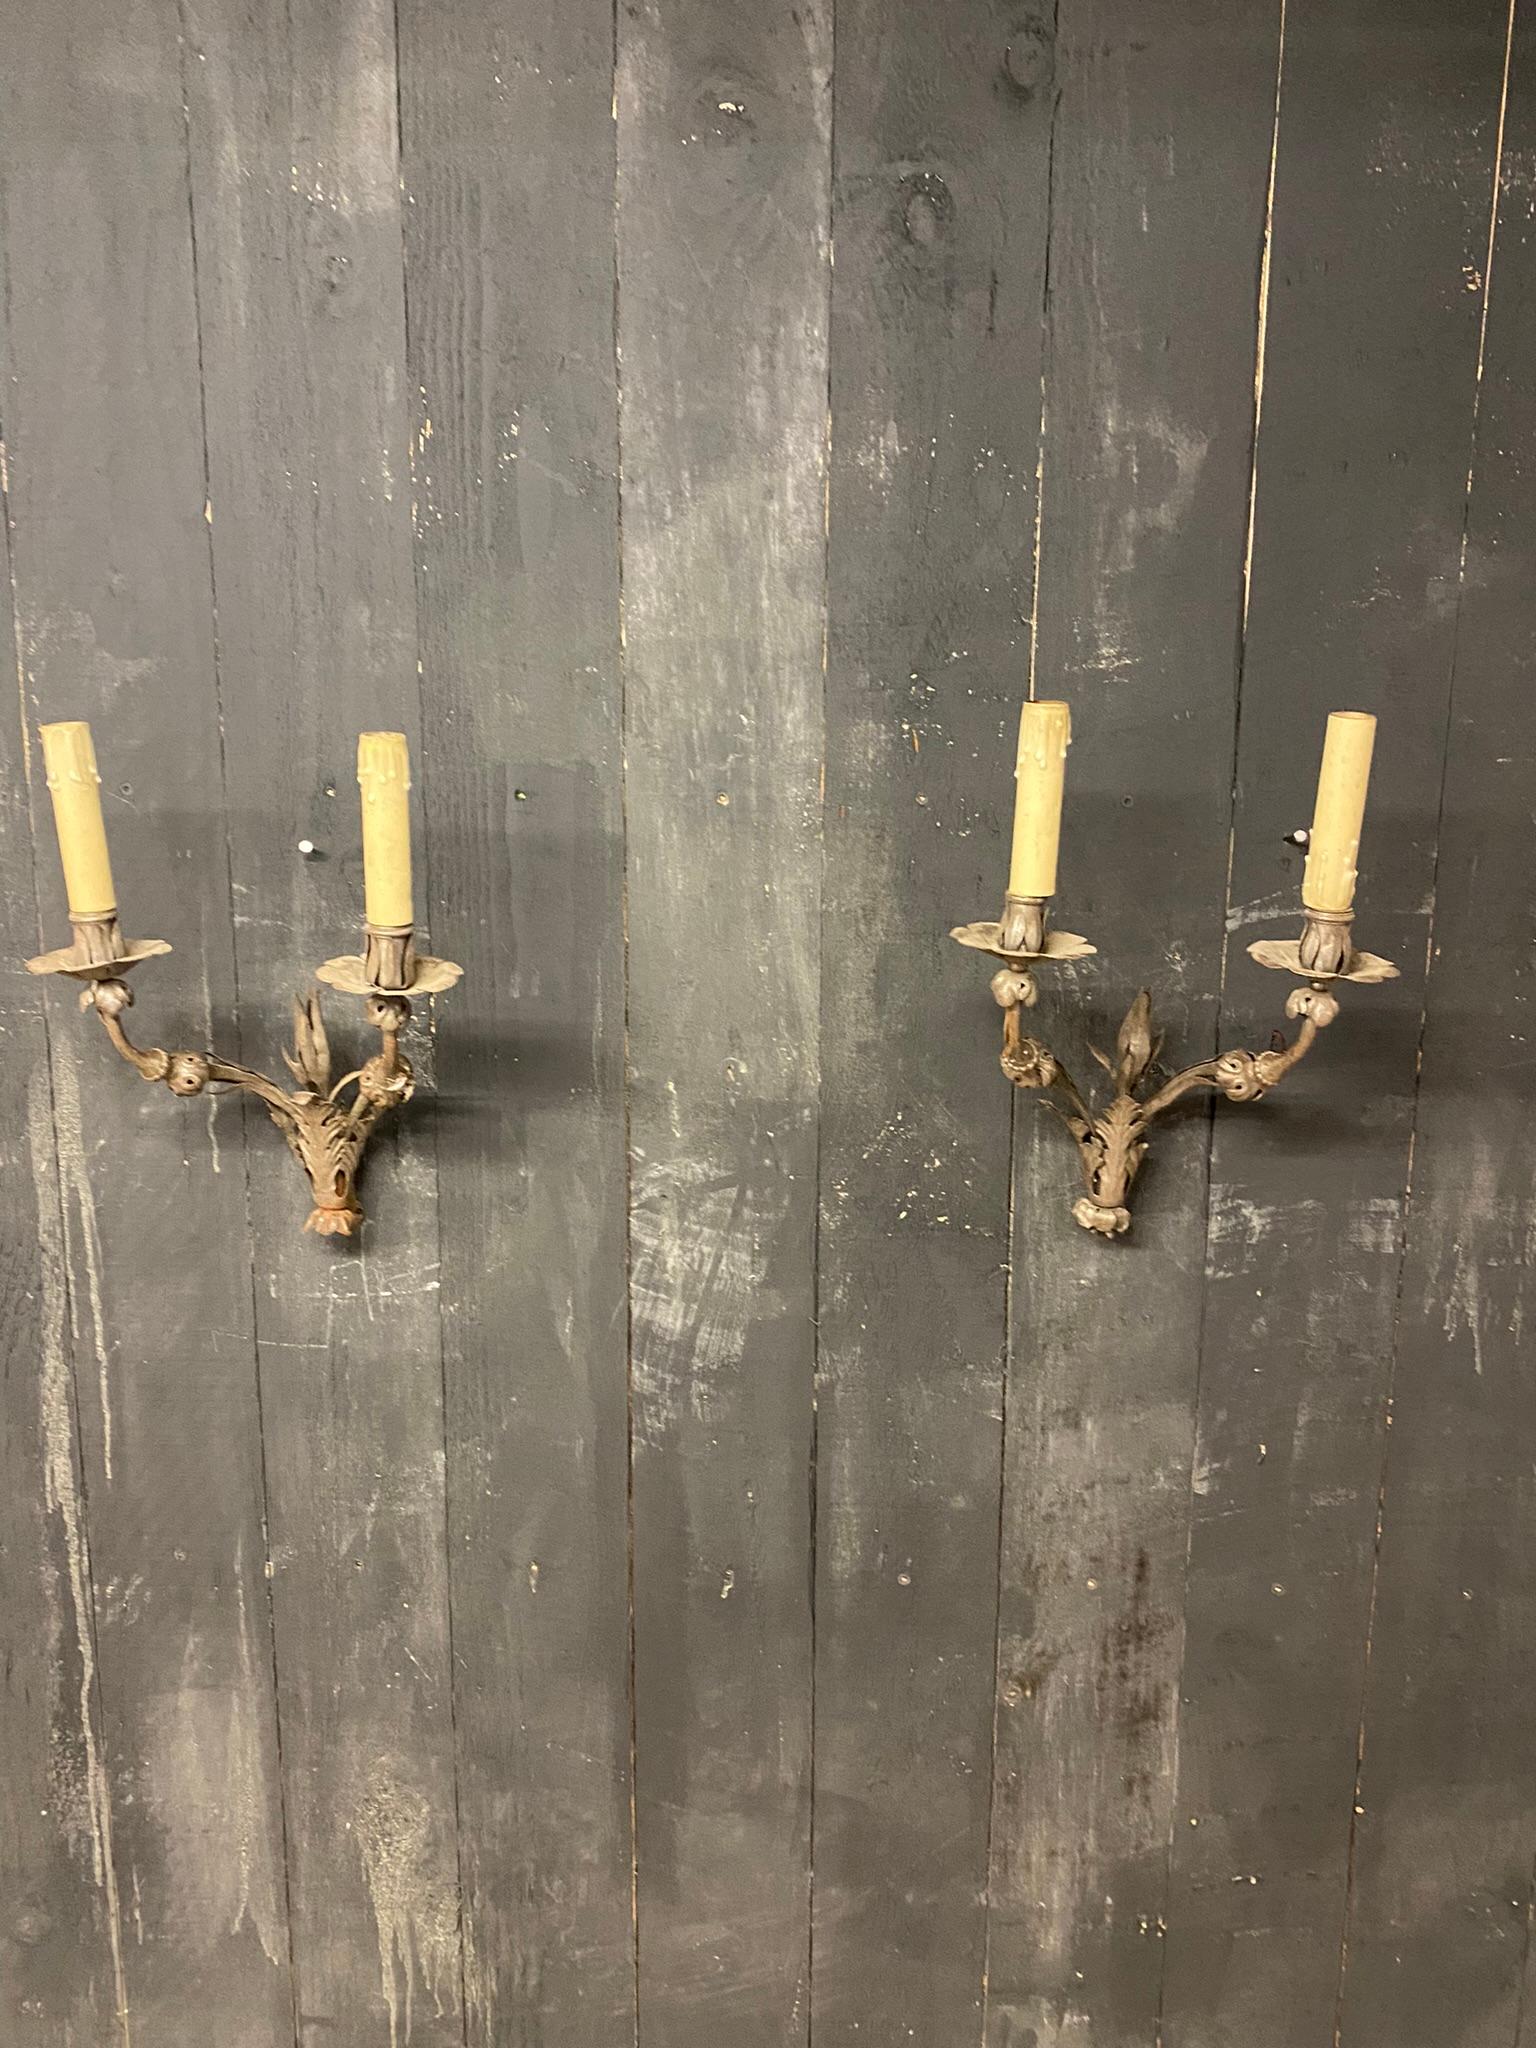 Elegant wrought iron sconces from a chateau in central France. around 1940/1950
2 Wall lights with 2 lights.

The iron has not been lacquered, not treated and tends to oxidize.
They are sold as is, possibility of polishing them and treating them